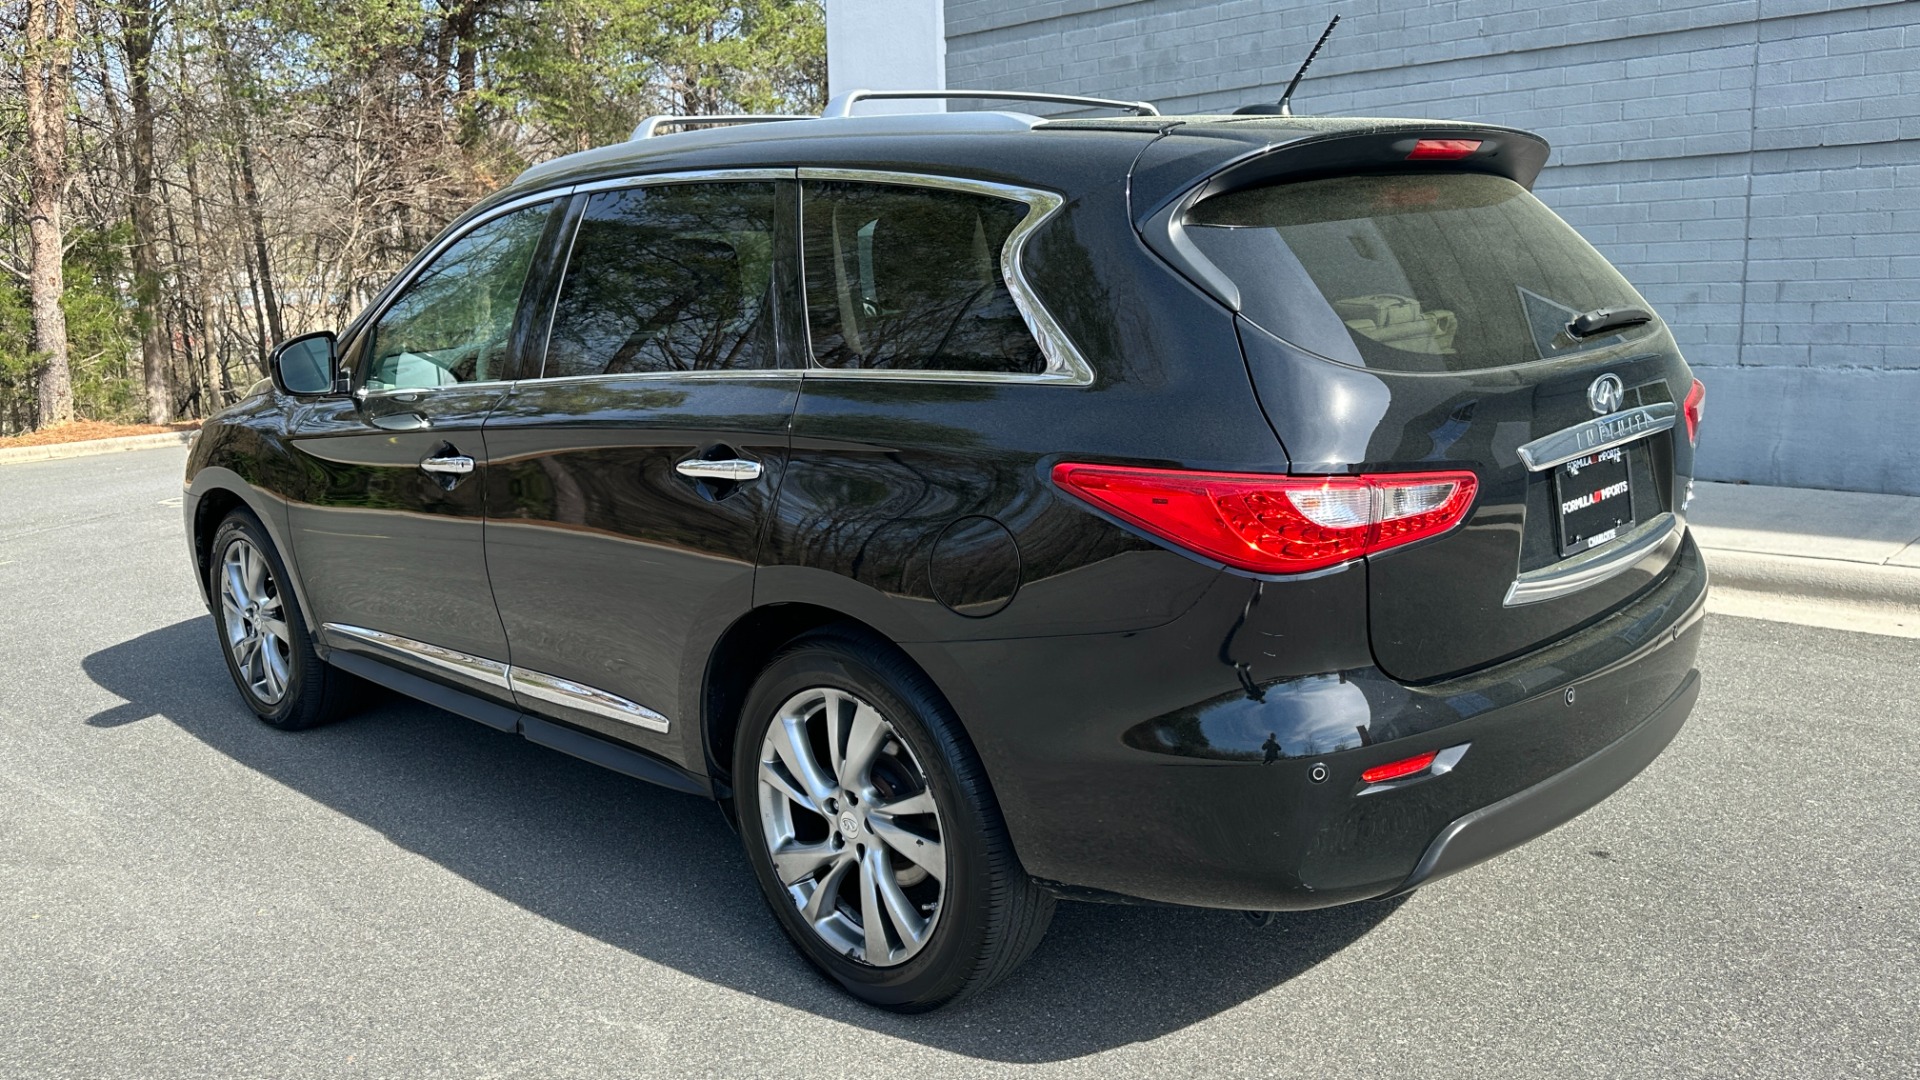 Used 2013 INFINITI JX35 AWD / DVD THEATER PKG / PREMIUM / DELUXE TECH / CARGO / TECH PKG for sale Sold at Formula Imports in Charlotte NC 28227 4